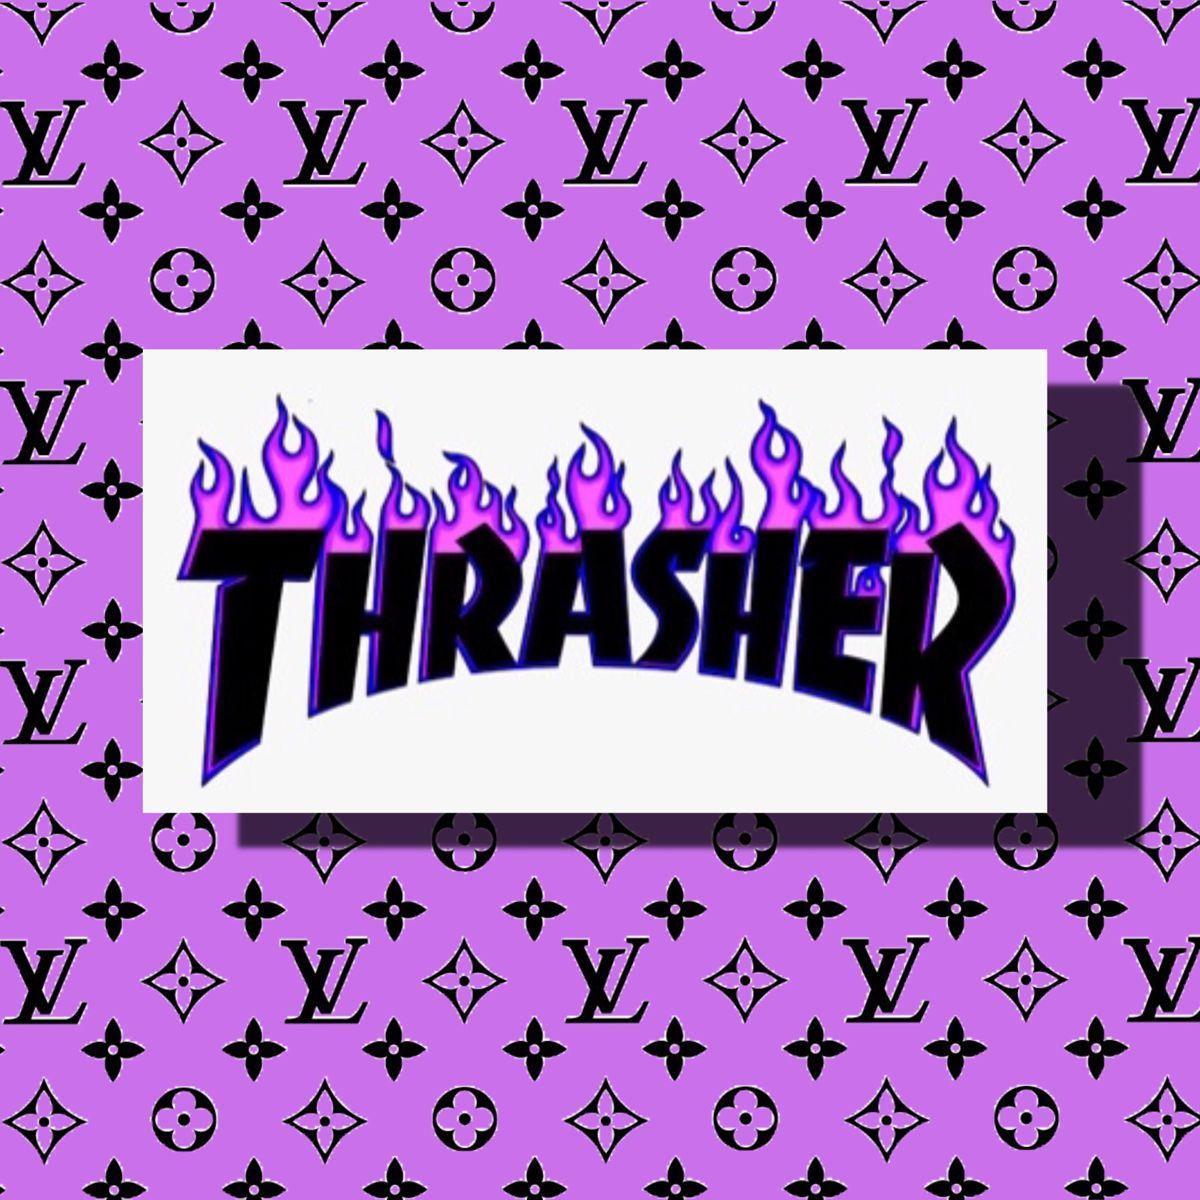 Download Thrasher wallpaper by Caleb134  ca  Free on ZEDGE now Browse  millions of popular spi  Hypebeast wallpaper Hypebeast iphone wallpaper  Hype wallpaper